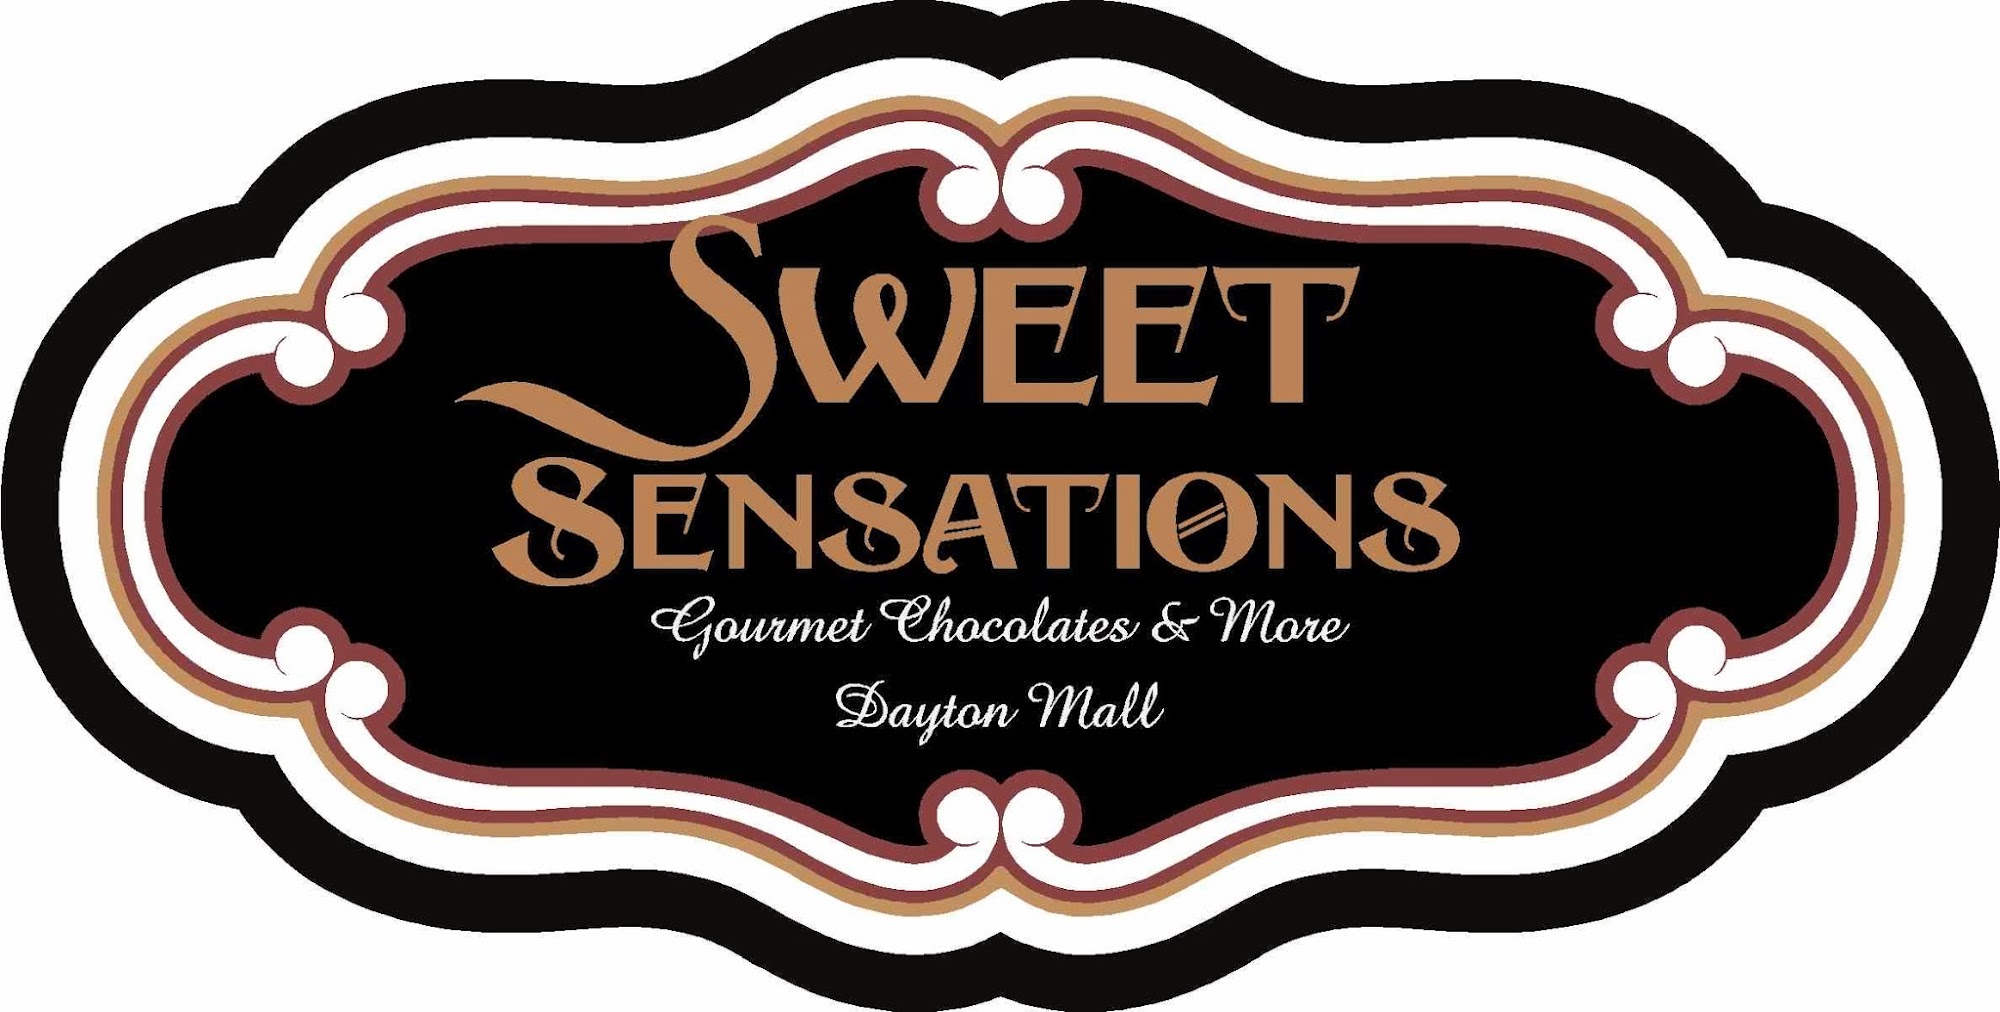 Sweet Sensations Chocolates and Candy